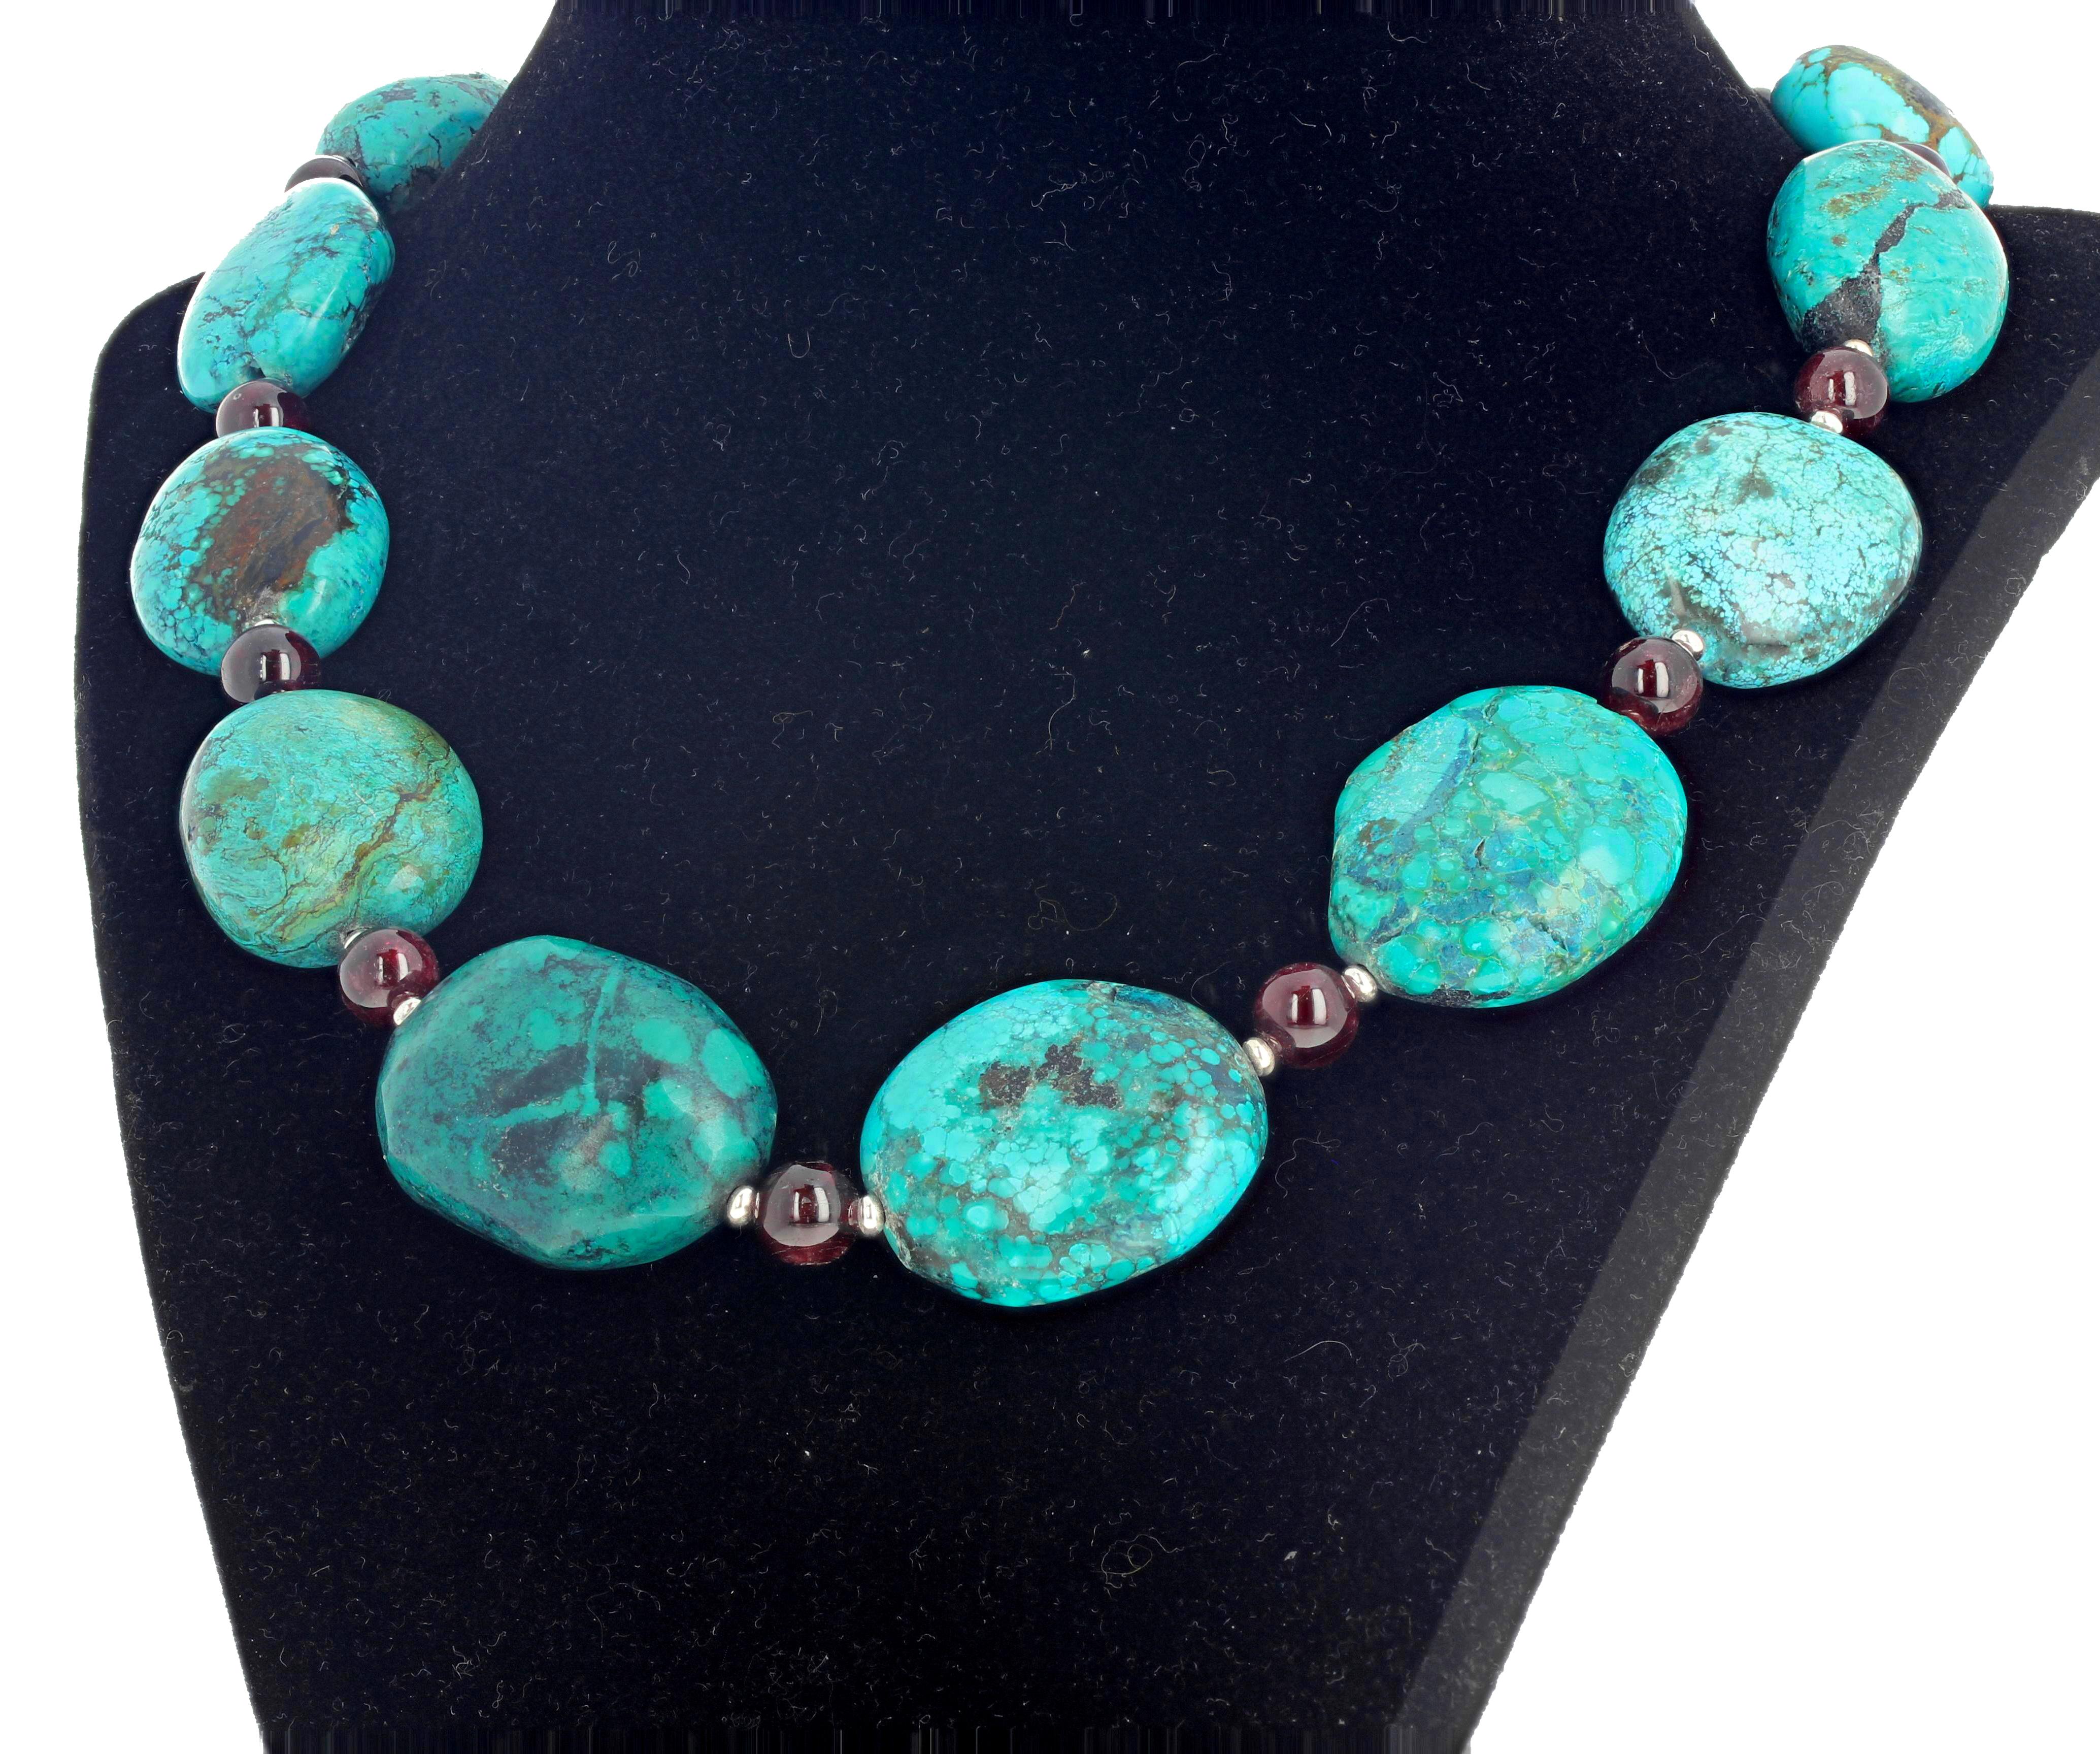 Beautiful polished round dark red glowing graduated Garnets enhance these artistic looking Turquoise set in this 19 inch long necklace with silver plated easy to use hook clasp.  The largest Turquoise is approximately 32 mm x 25 mm.   If you wish